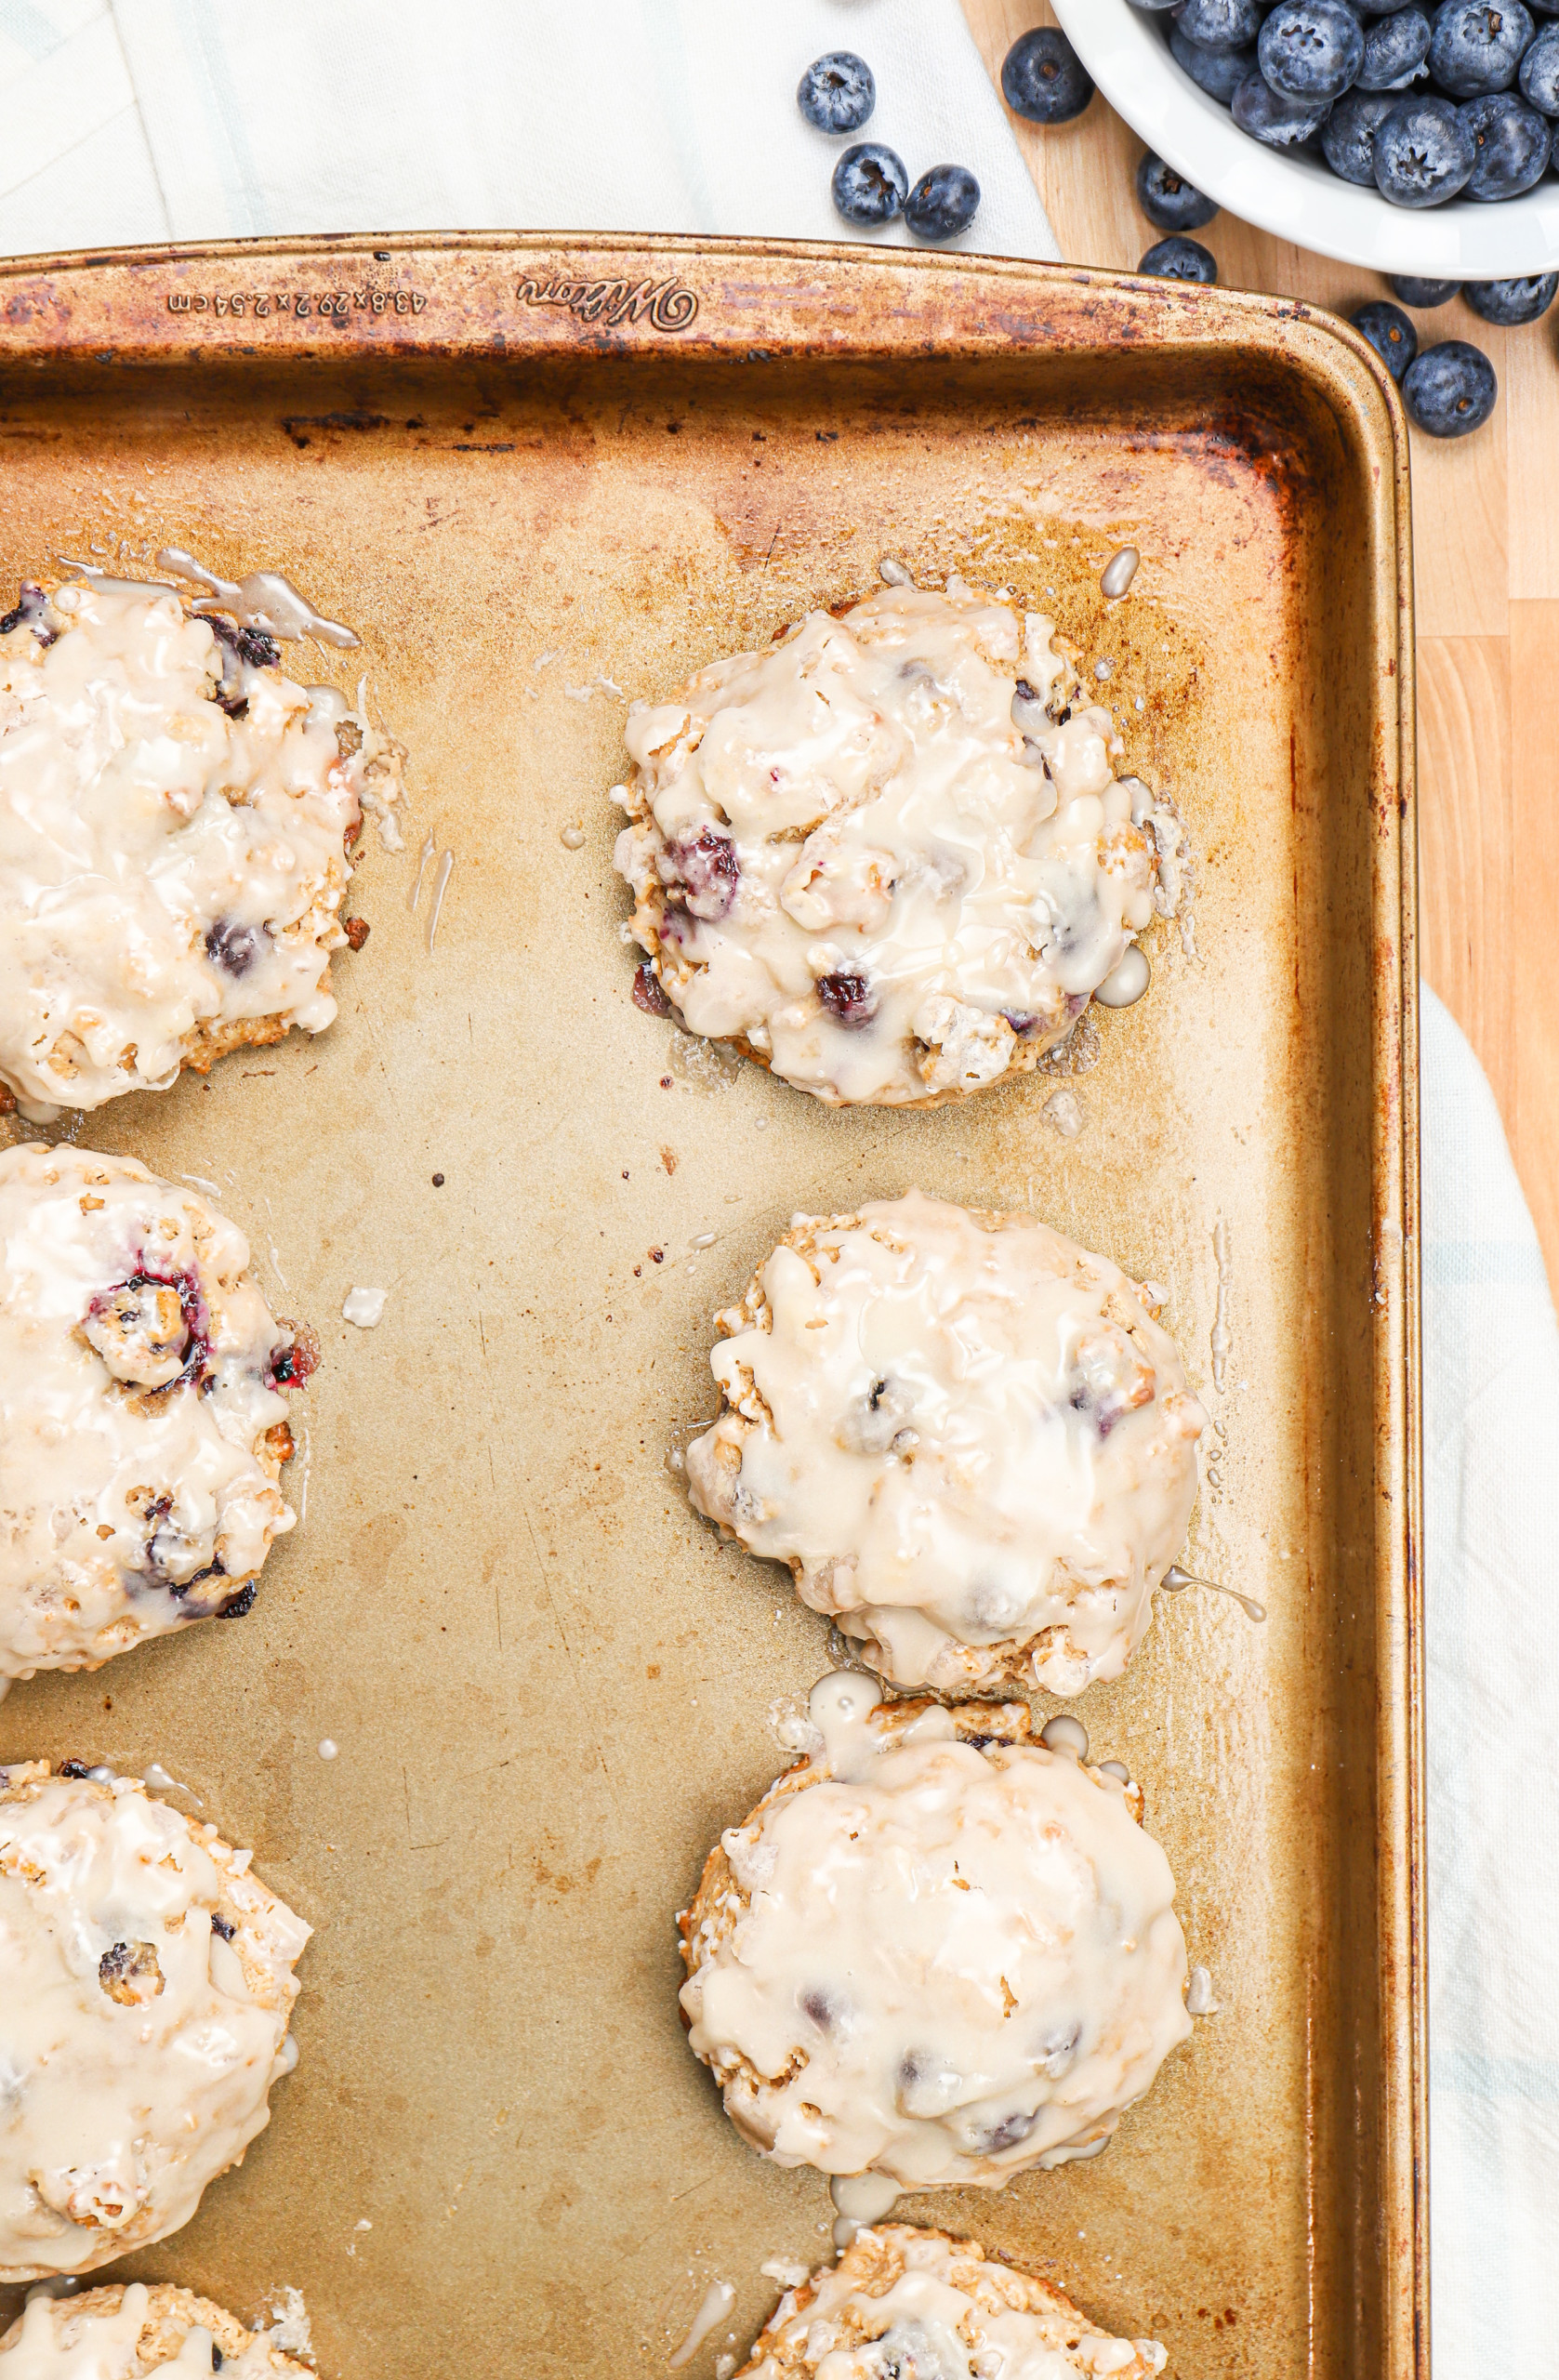 Overhead view of a batch of baked blueberry fritters on an aluminum baking sheet.